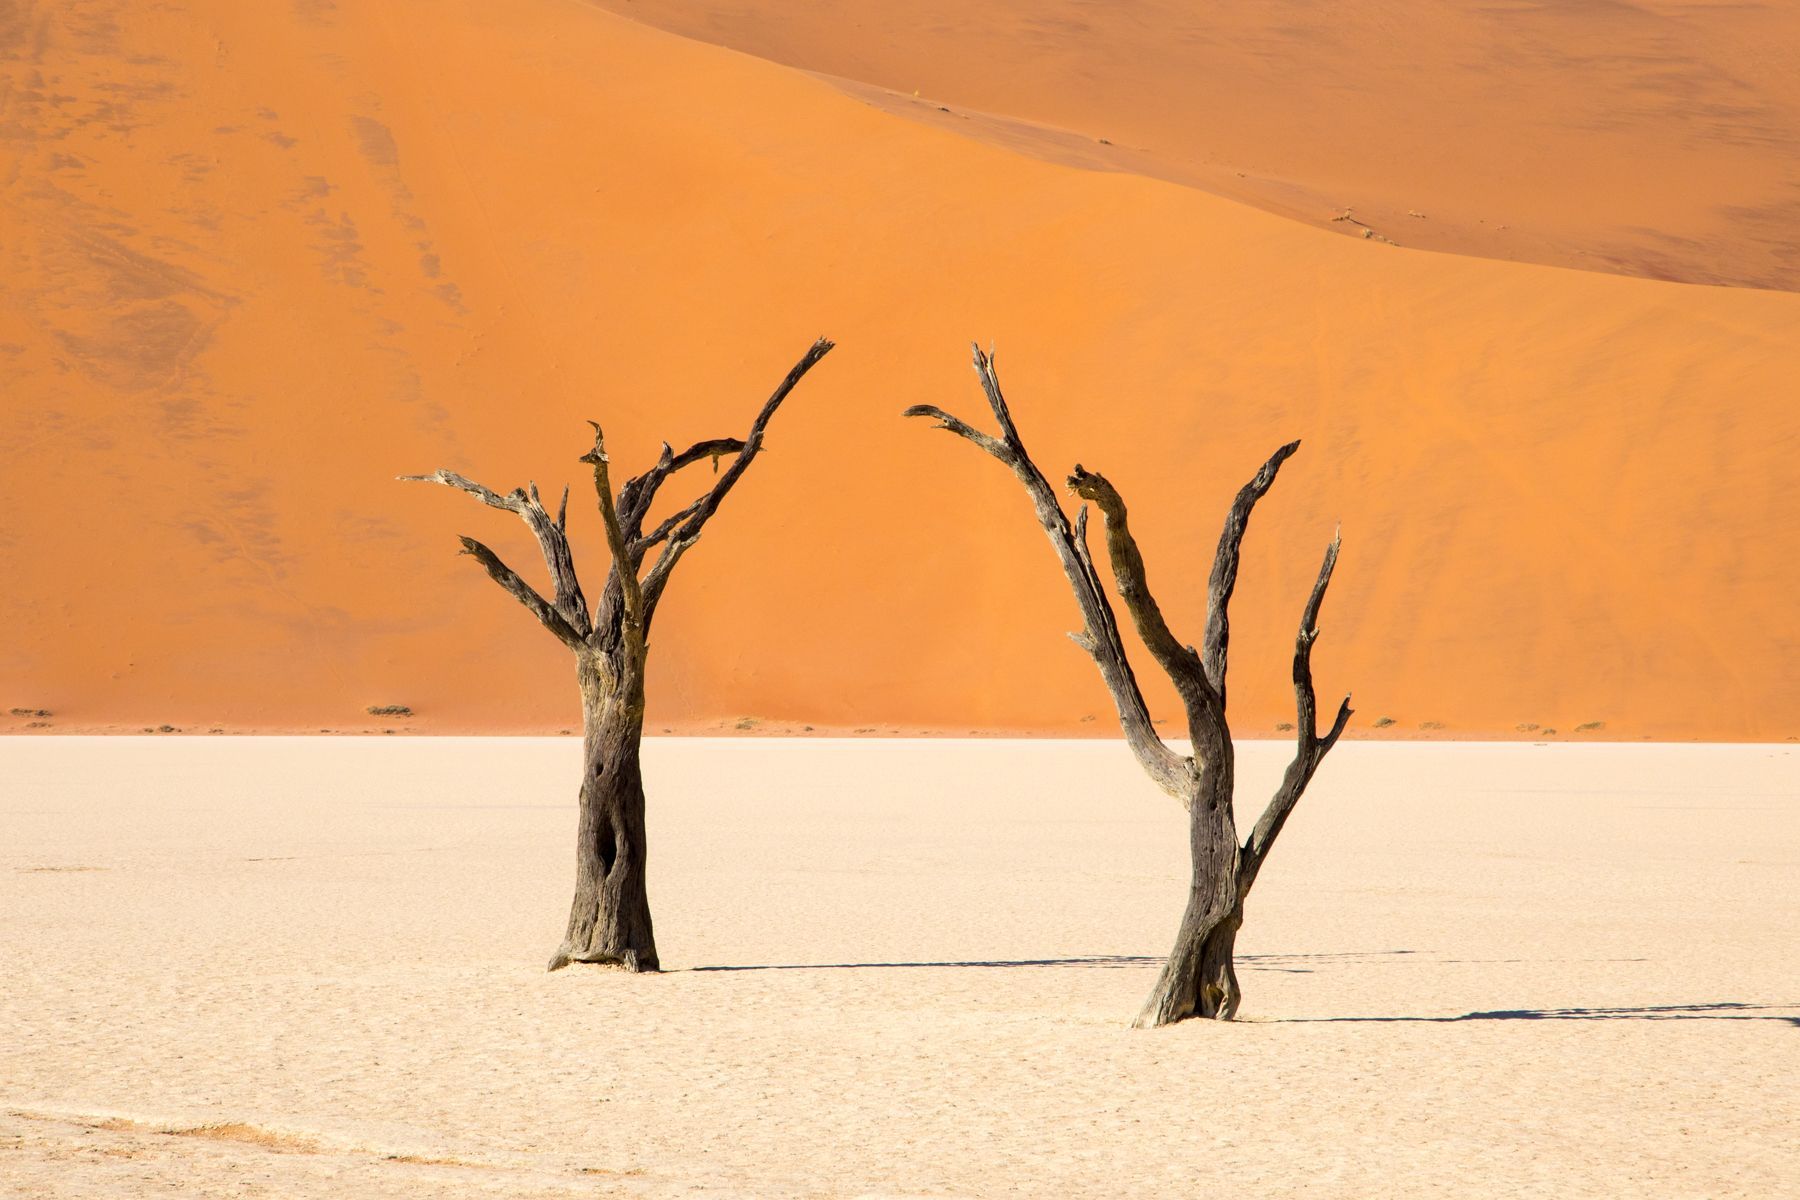 Our Namibia photography tour takes you to the incredible Deadvlei at sunrise